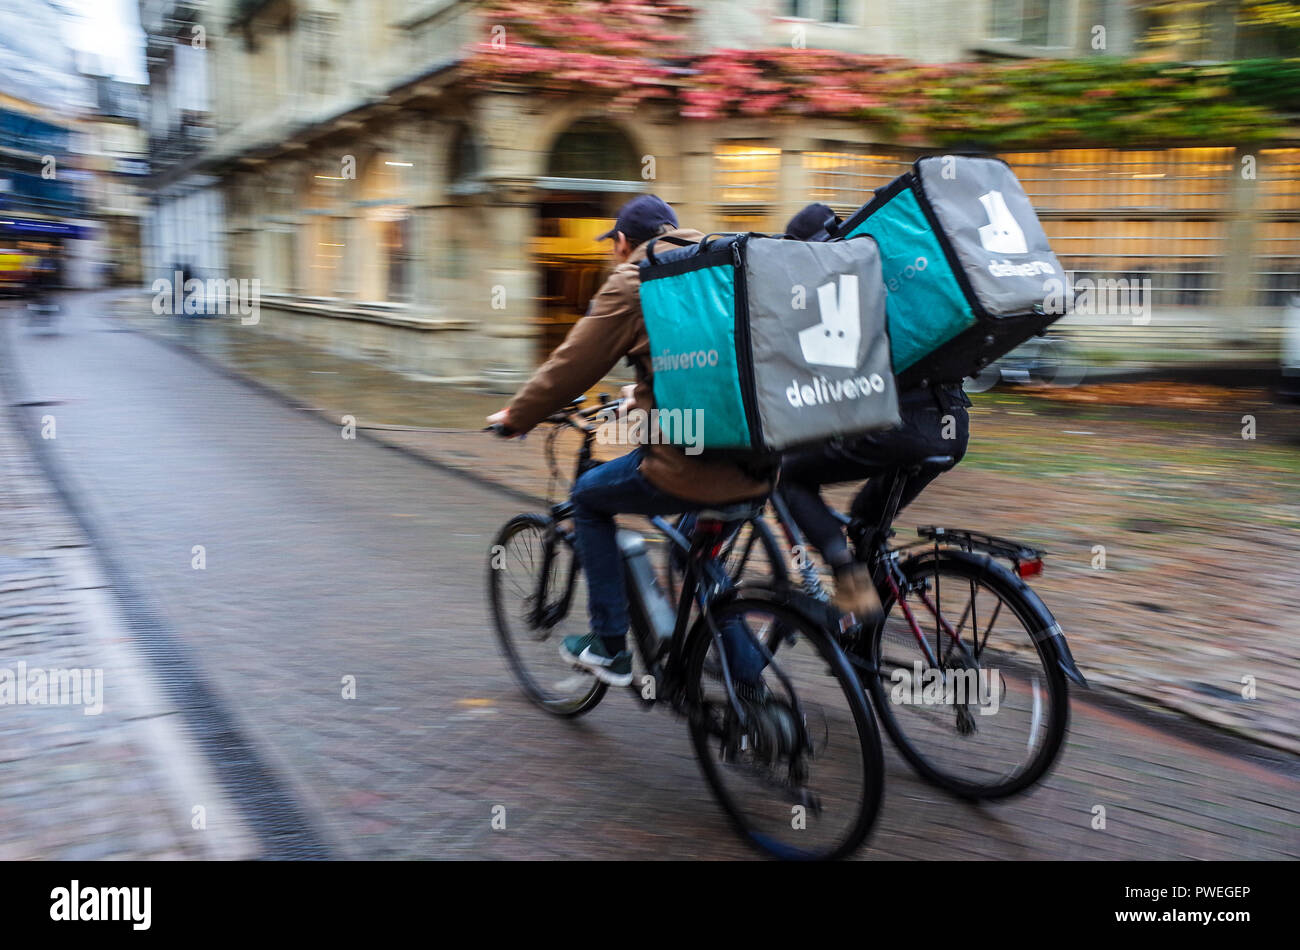 Deliveroo Riders Gig Economy - two Deliveroo Food Delivery Couriers ride through central Cambridge Stock Photo